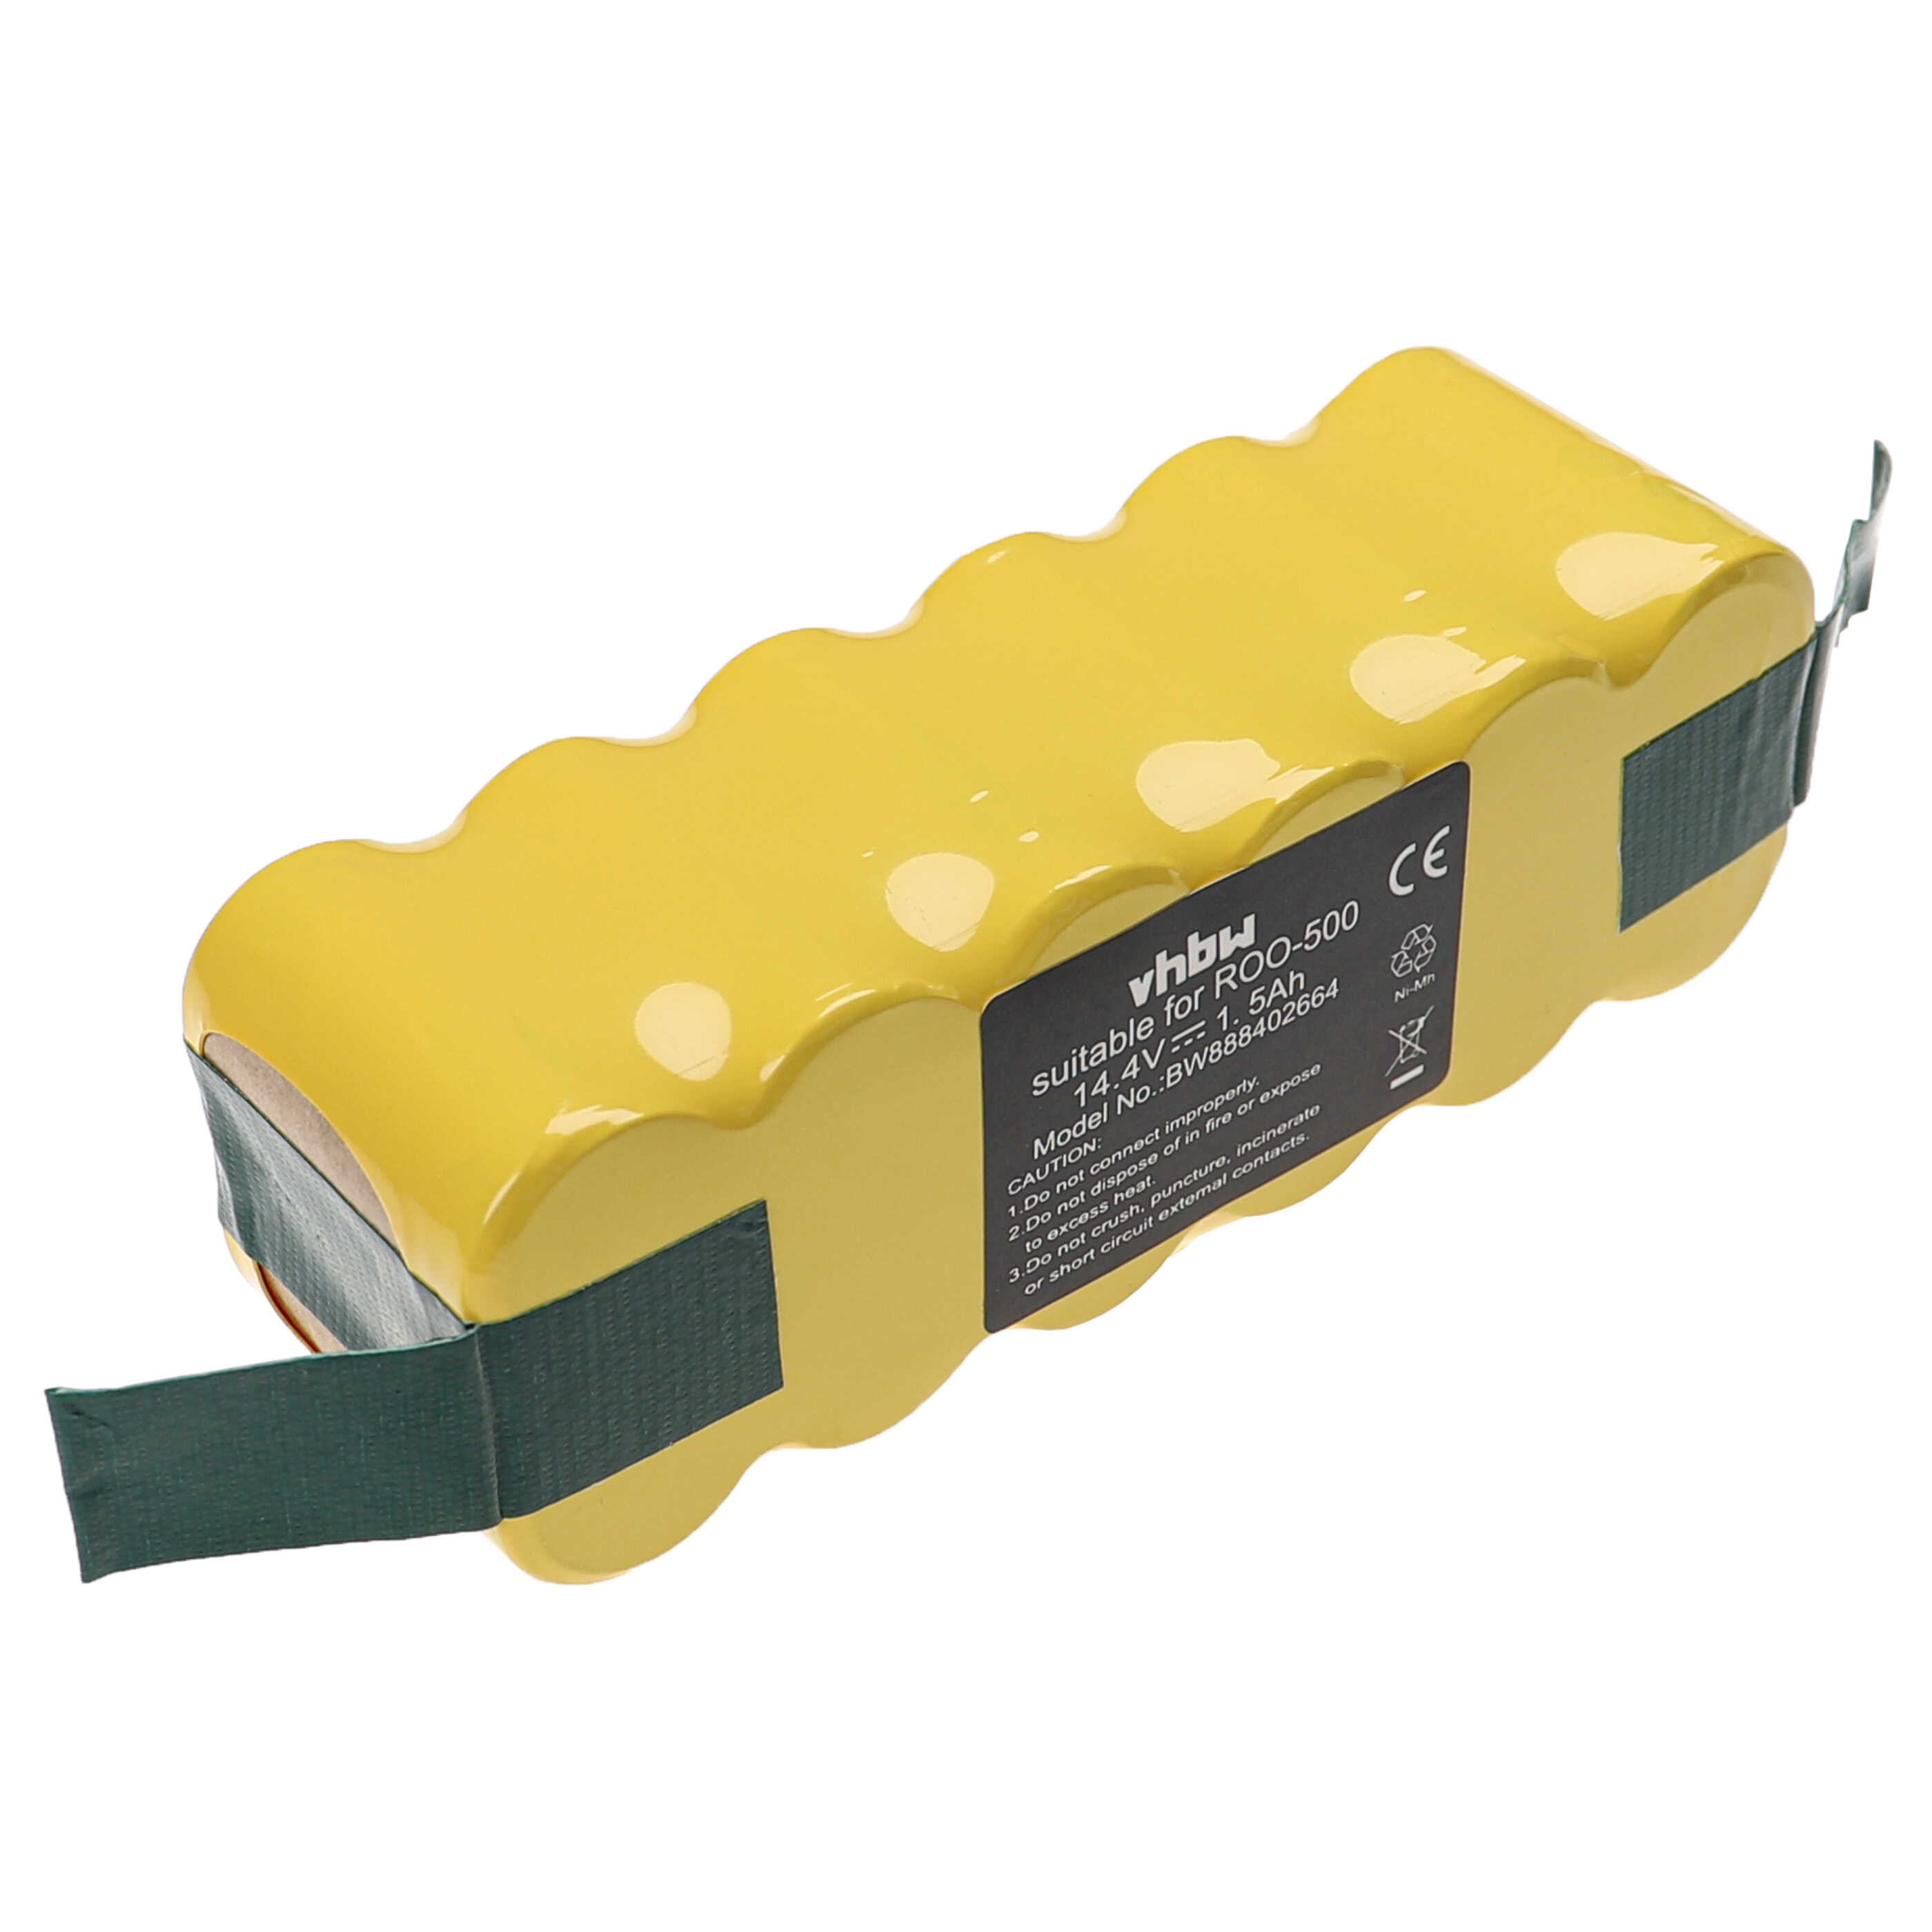 Battery Replacement for 80501e, 80601, 11702, 68939, 80501, 855714, 4419696 for - 1500mAh, 14.4V, NiMH